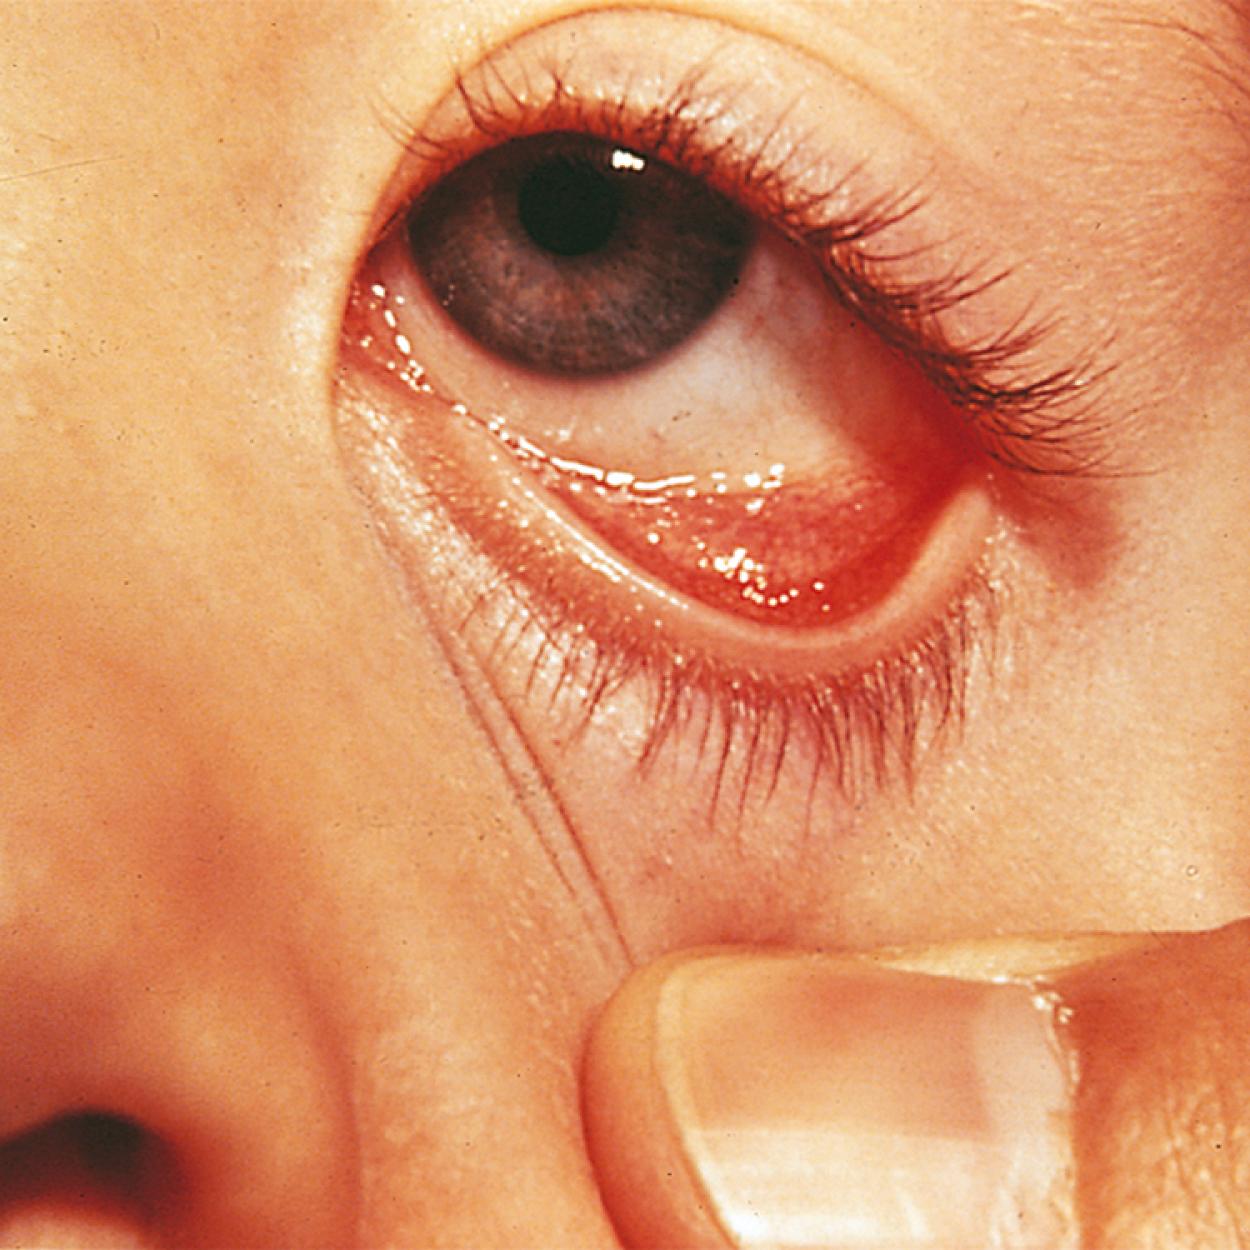 Fig. 4.33, Allergic cobblestoning of the conjunctiva in chronic allergic conjunctivitis. This granular appearance is due to edema and hyperplasia of the papillae.